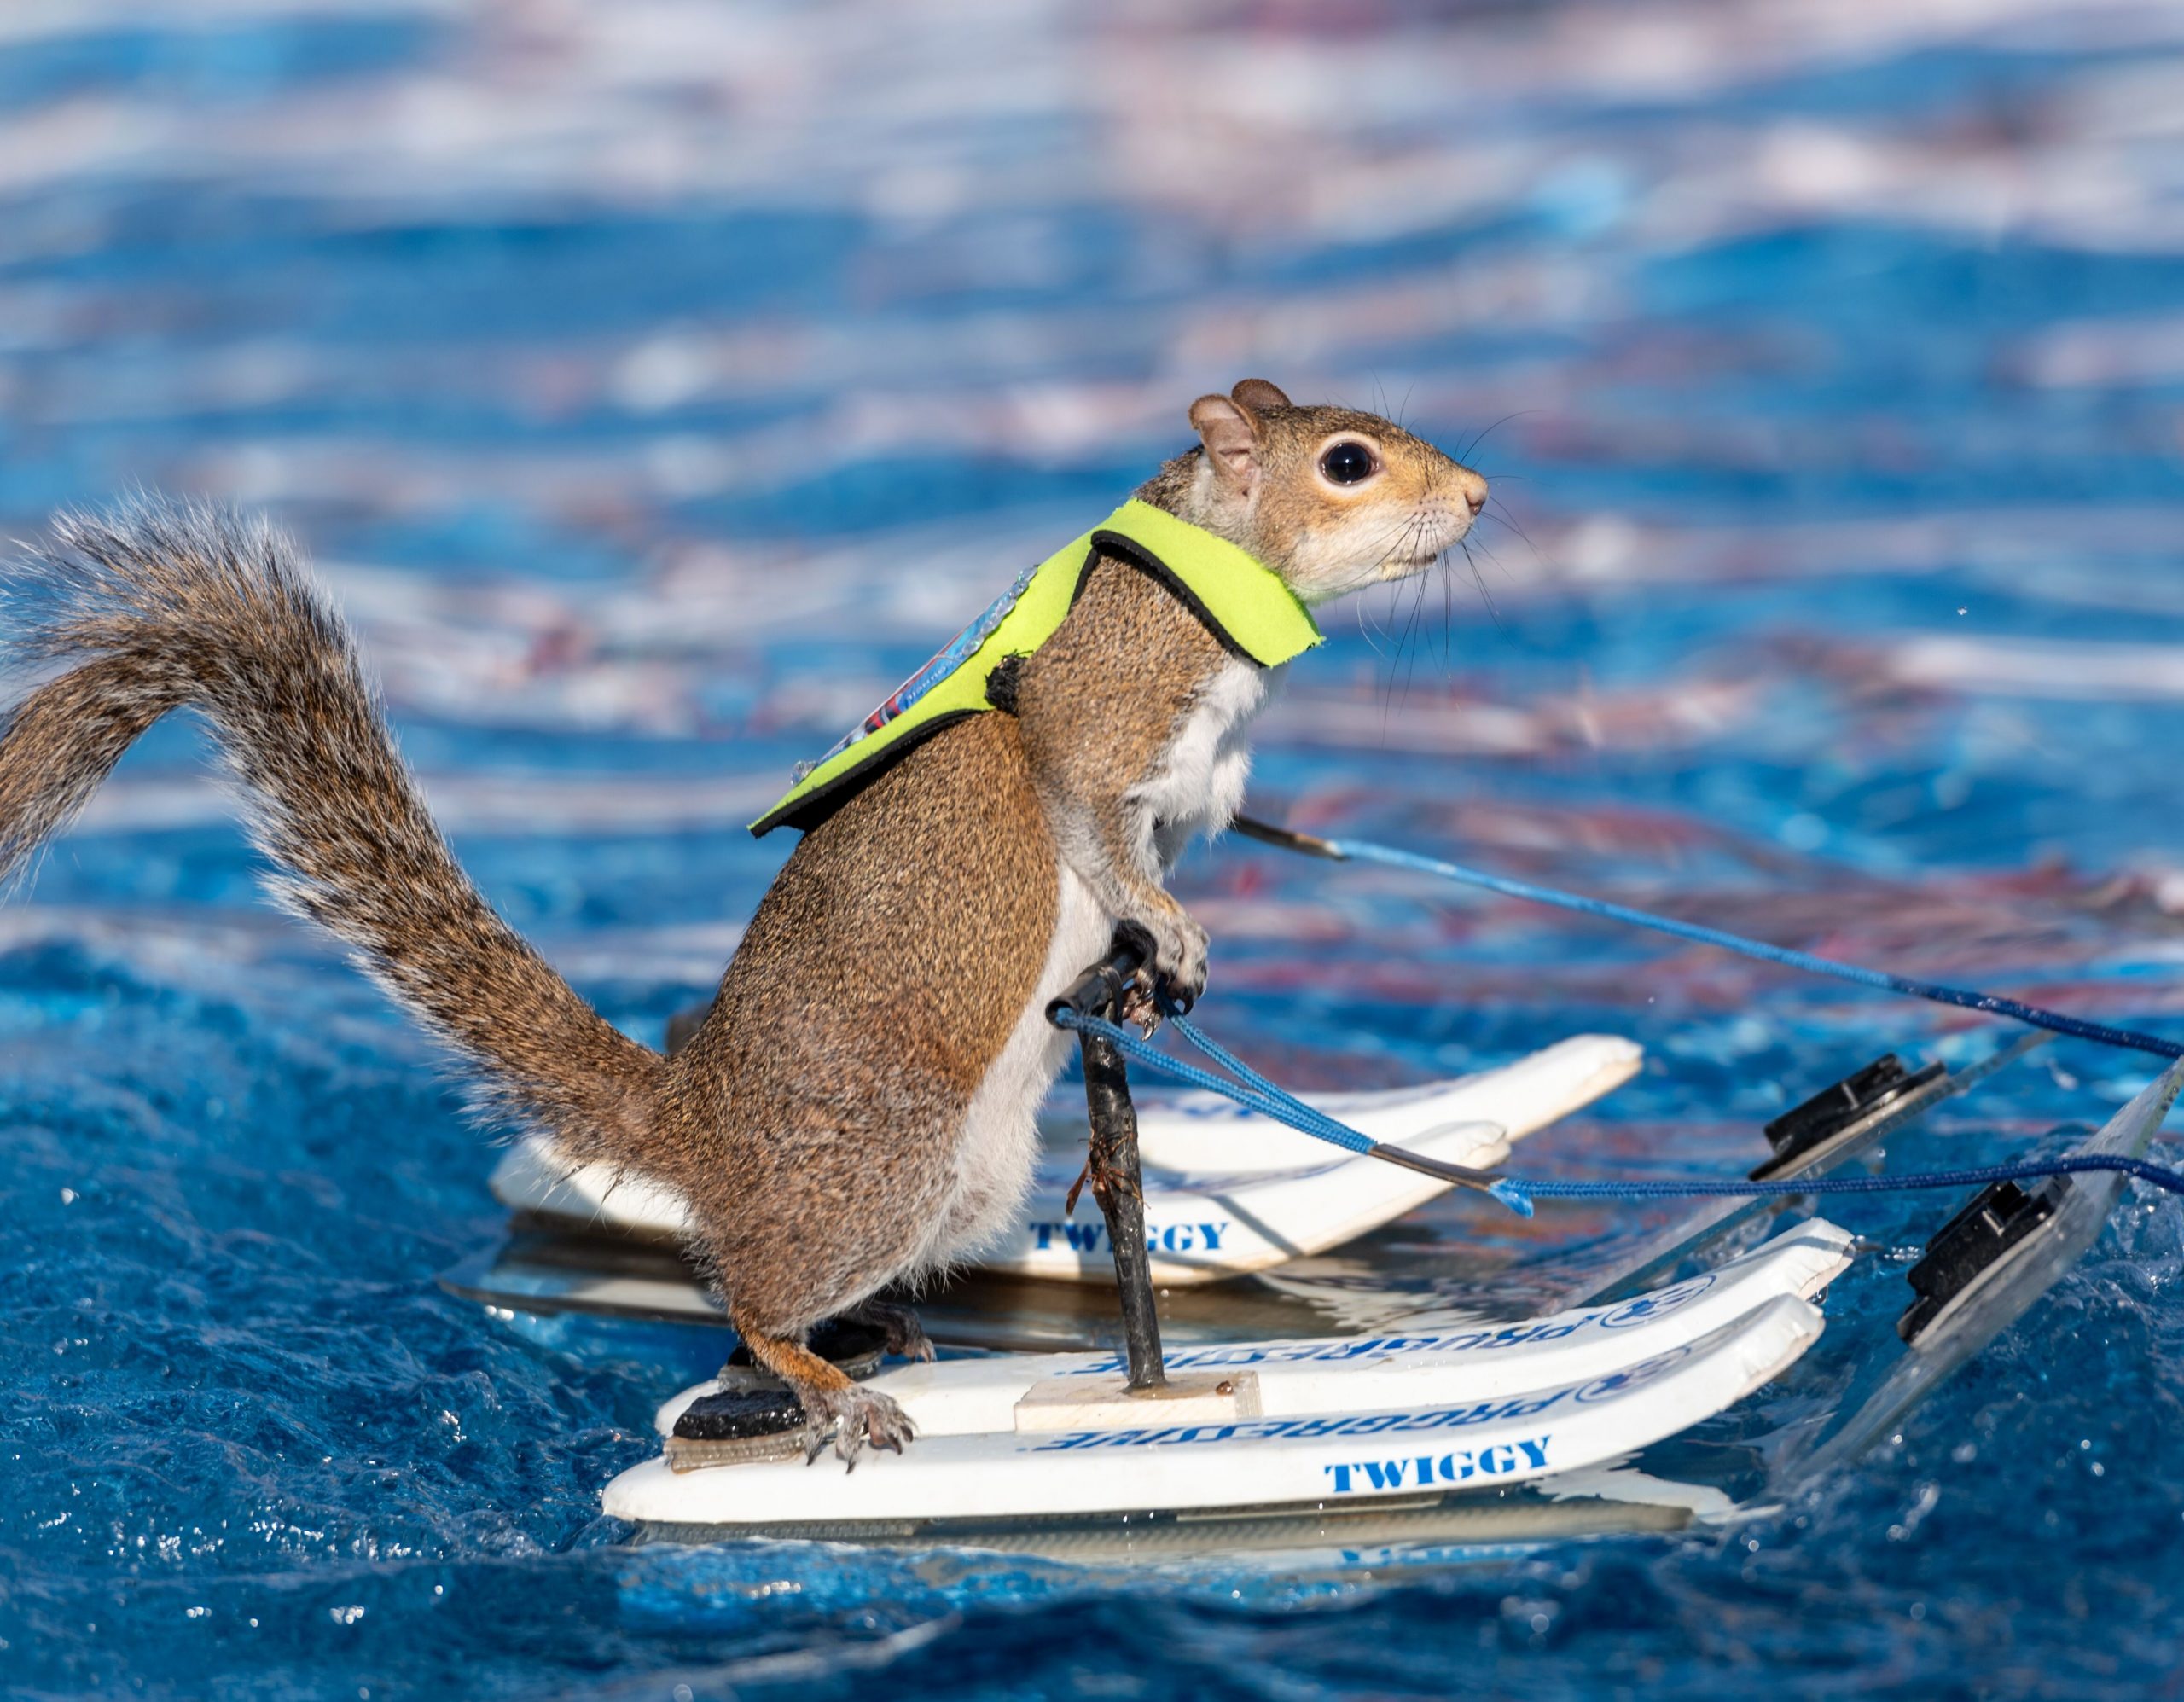 twiggy the squirrel at the boat show